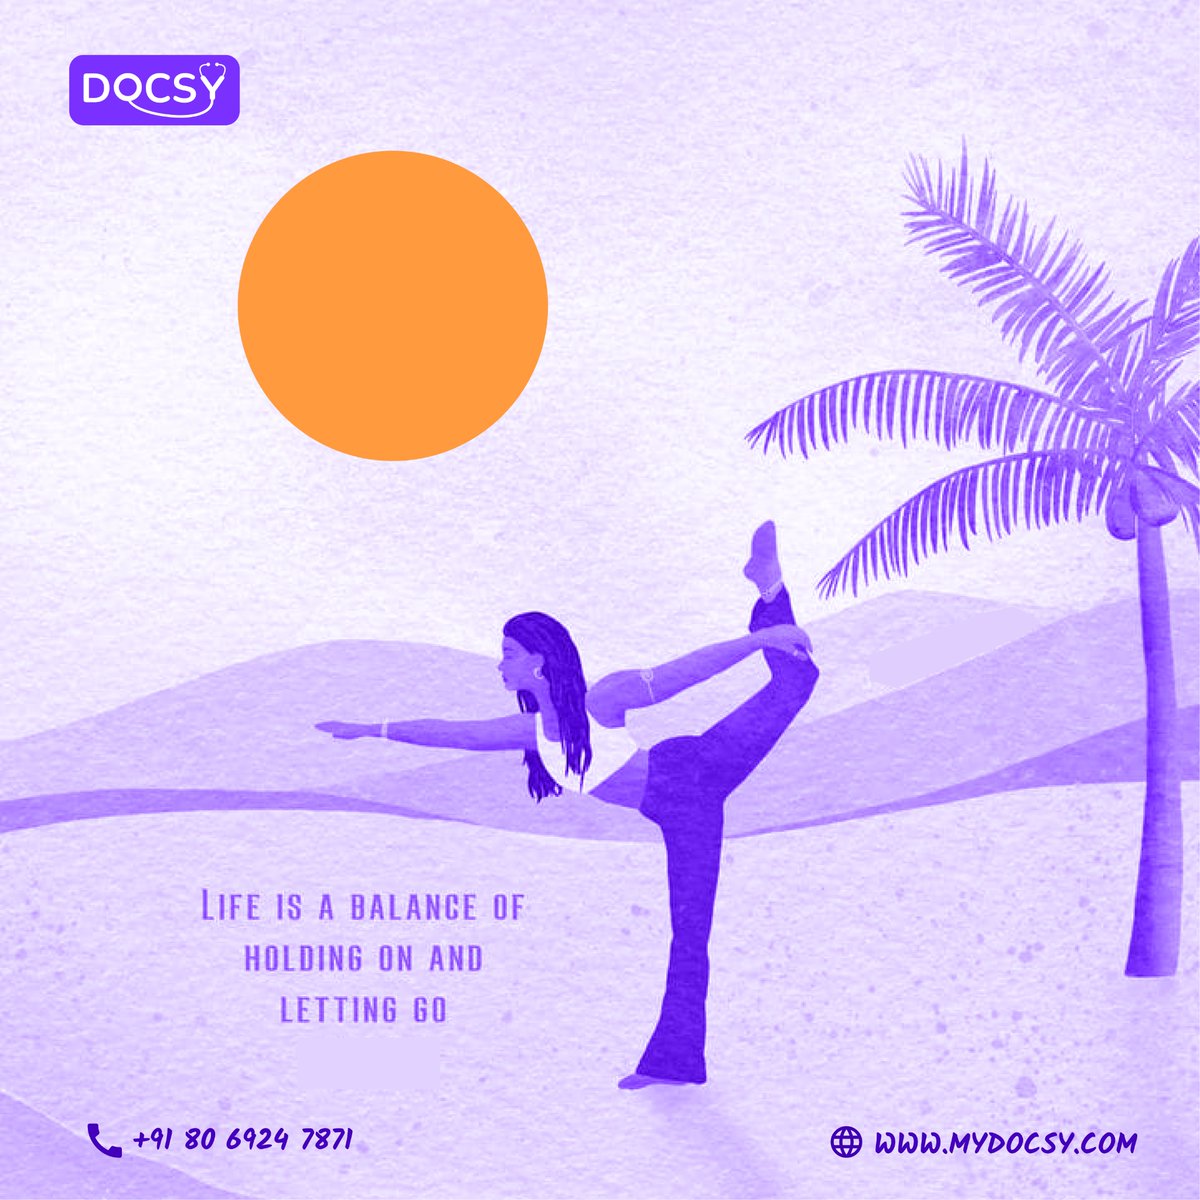 Life is a delicate balance of holding on and letting go. 🌿 

Finding this balance is key to our mental wellness and inner peace. 

#Supportmentalhealth with @mydocsy 💜

#mentalhealthawareness #mentalhealth #mentalwellness #mydocsy #